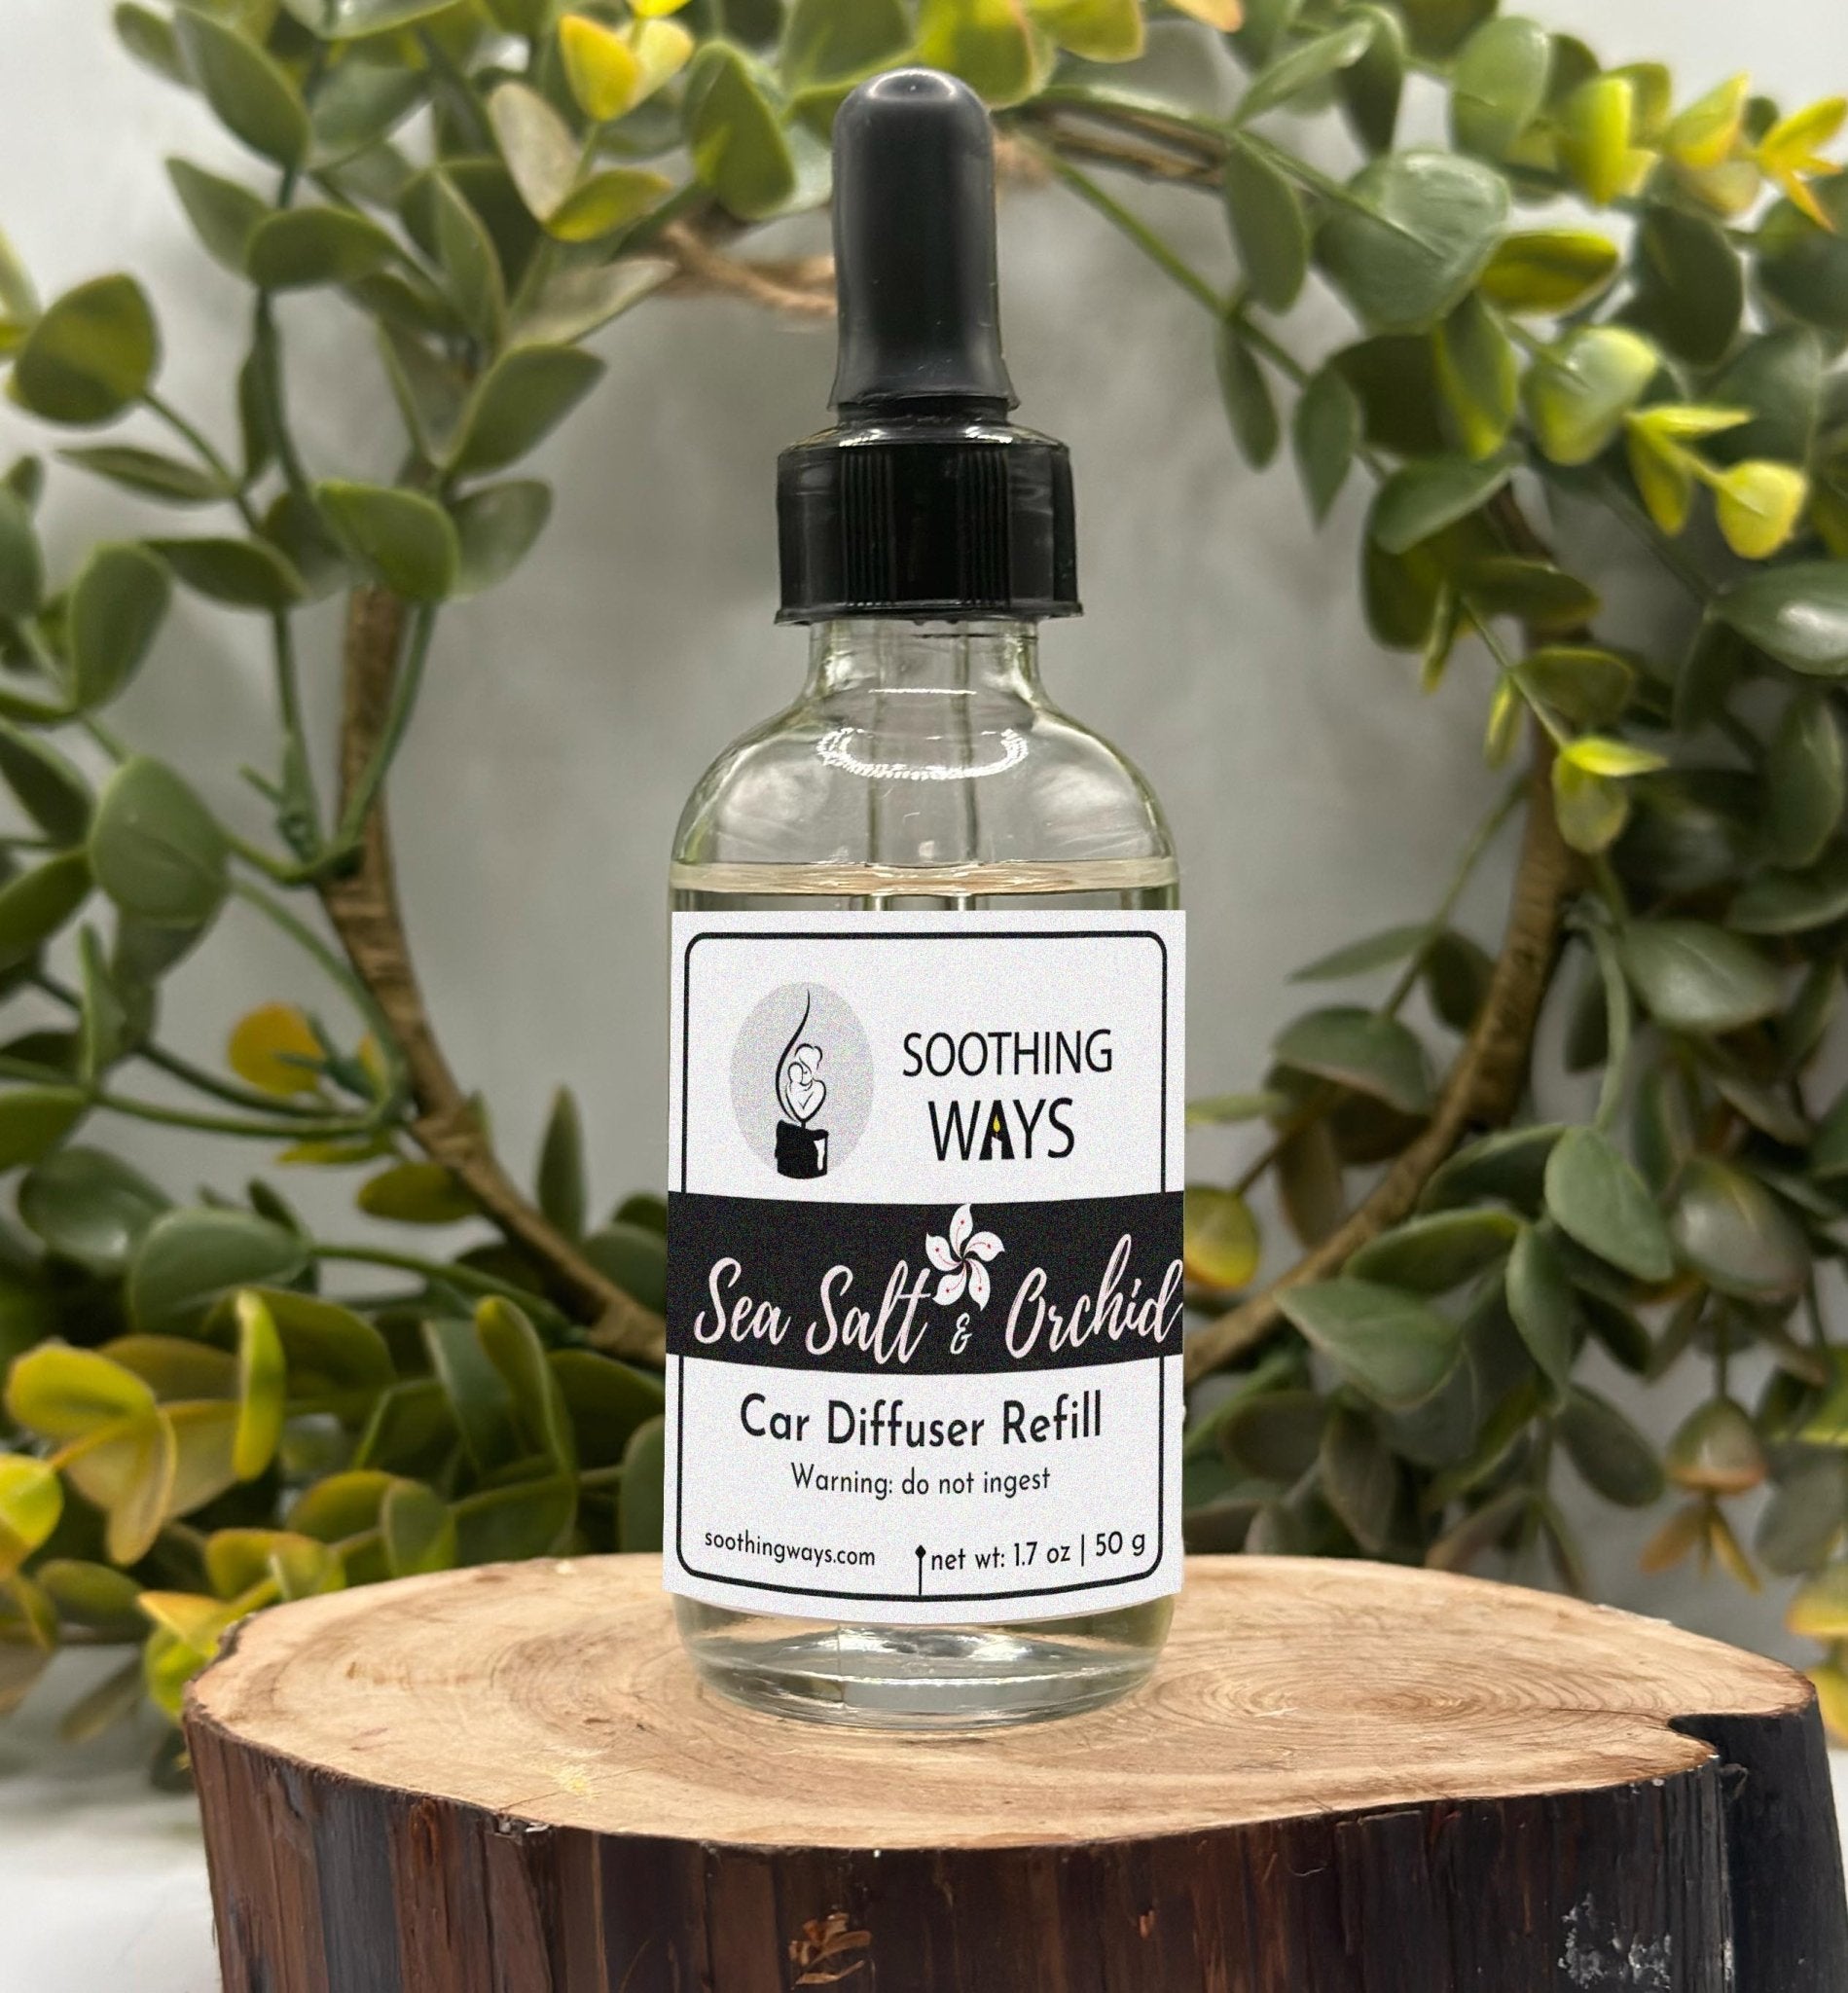 Sea Salt & Orchid - Car Diffuser Fragrance Refill - Soothing Ways